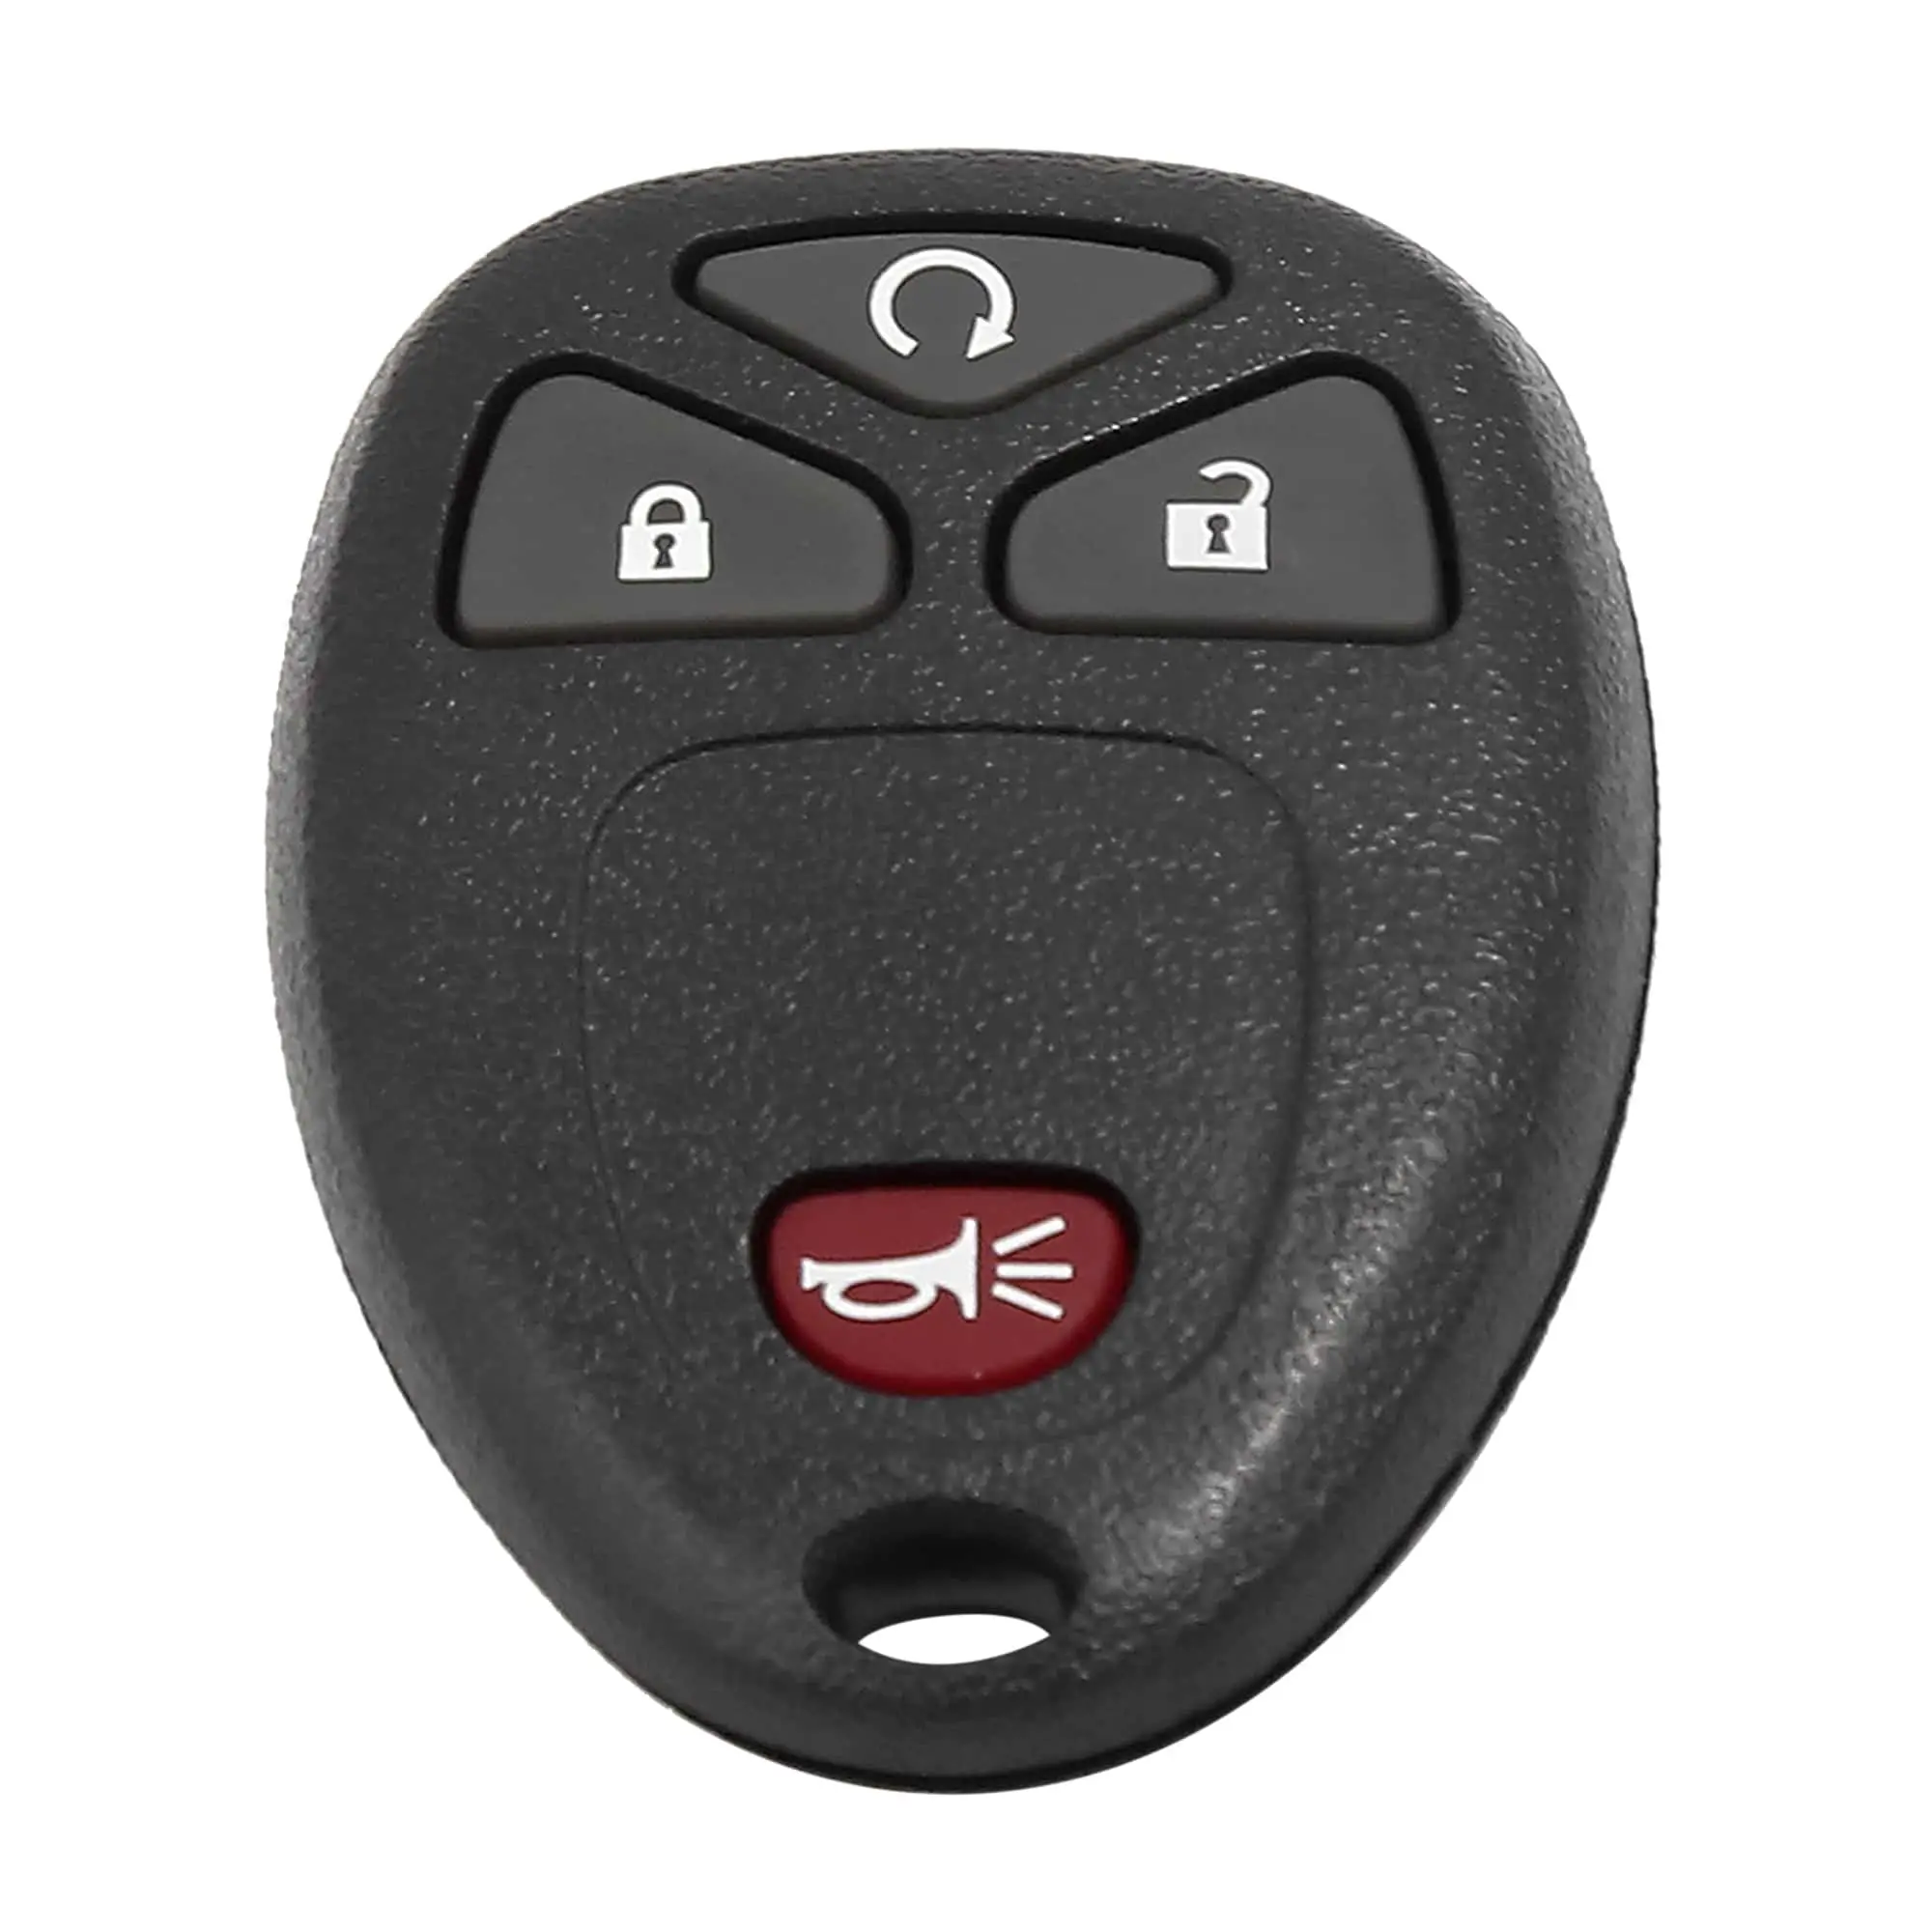 2Pcs New Replacement Keyless Entry Car Remote Key Fob for Chevrolet ...